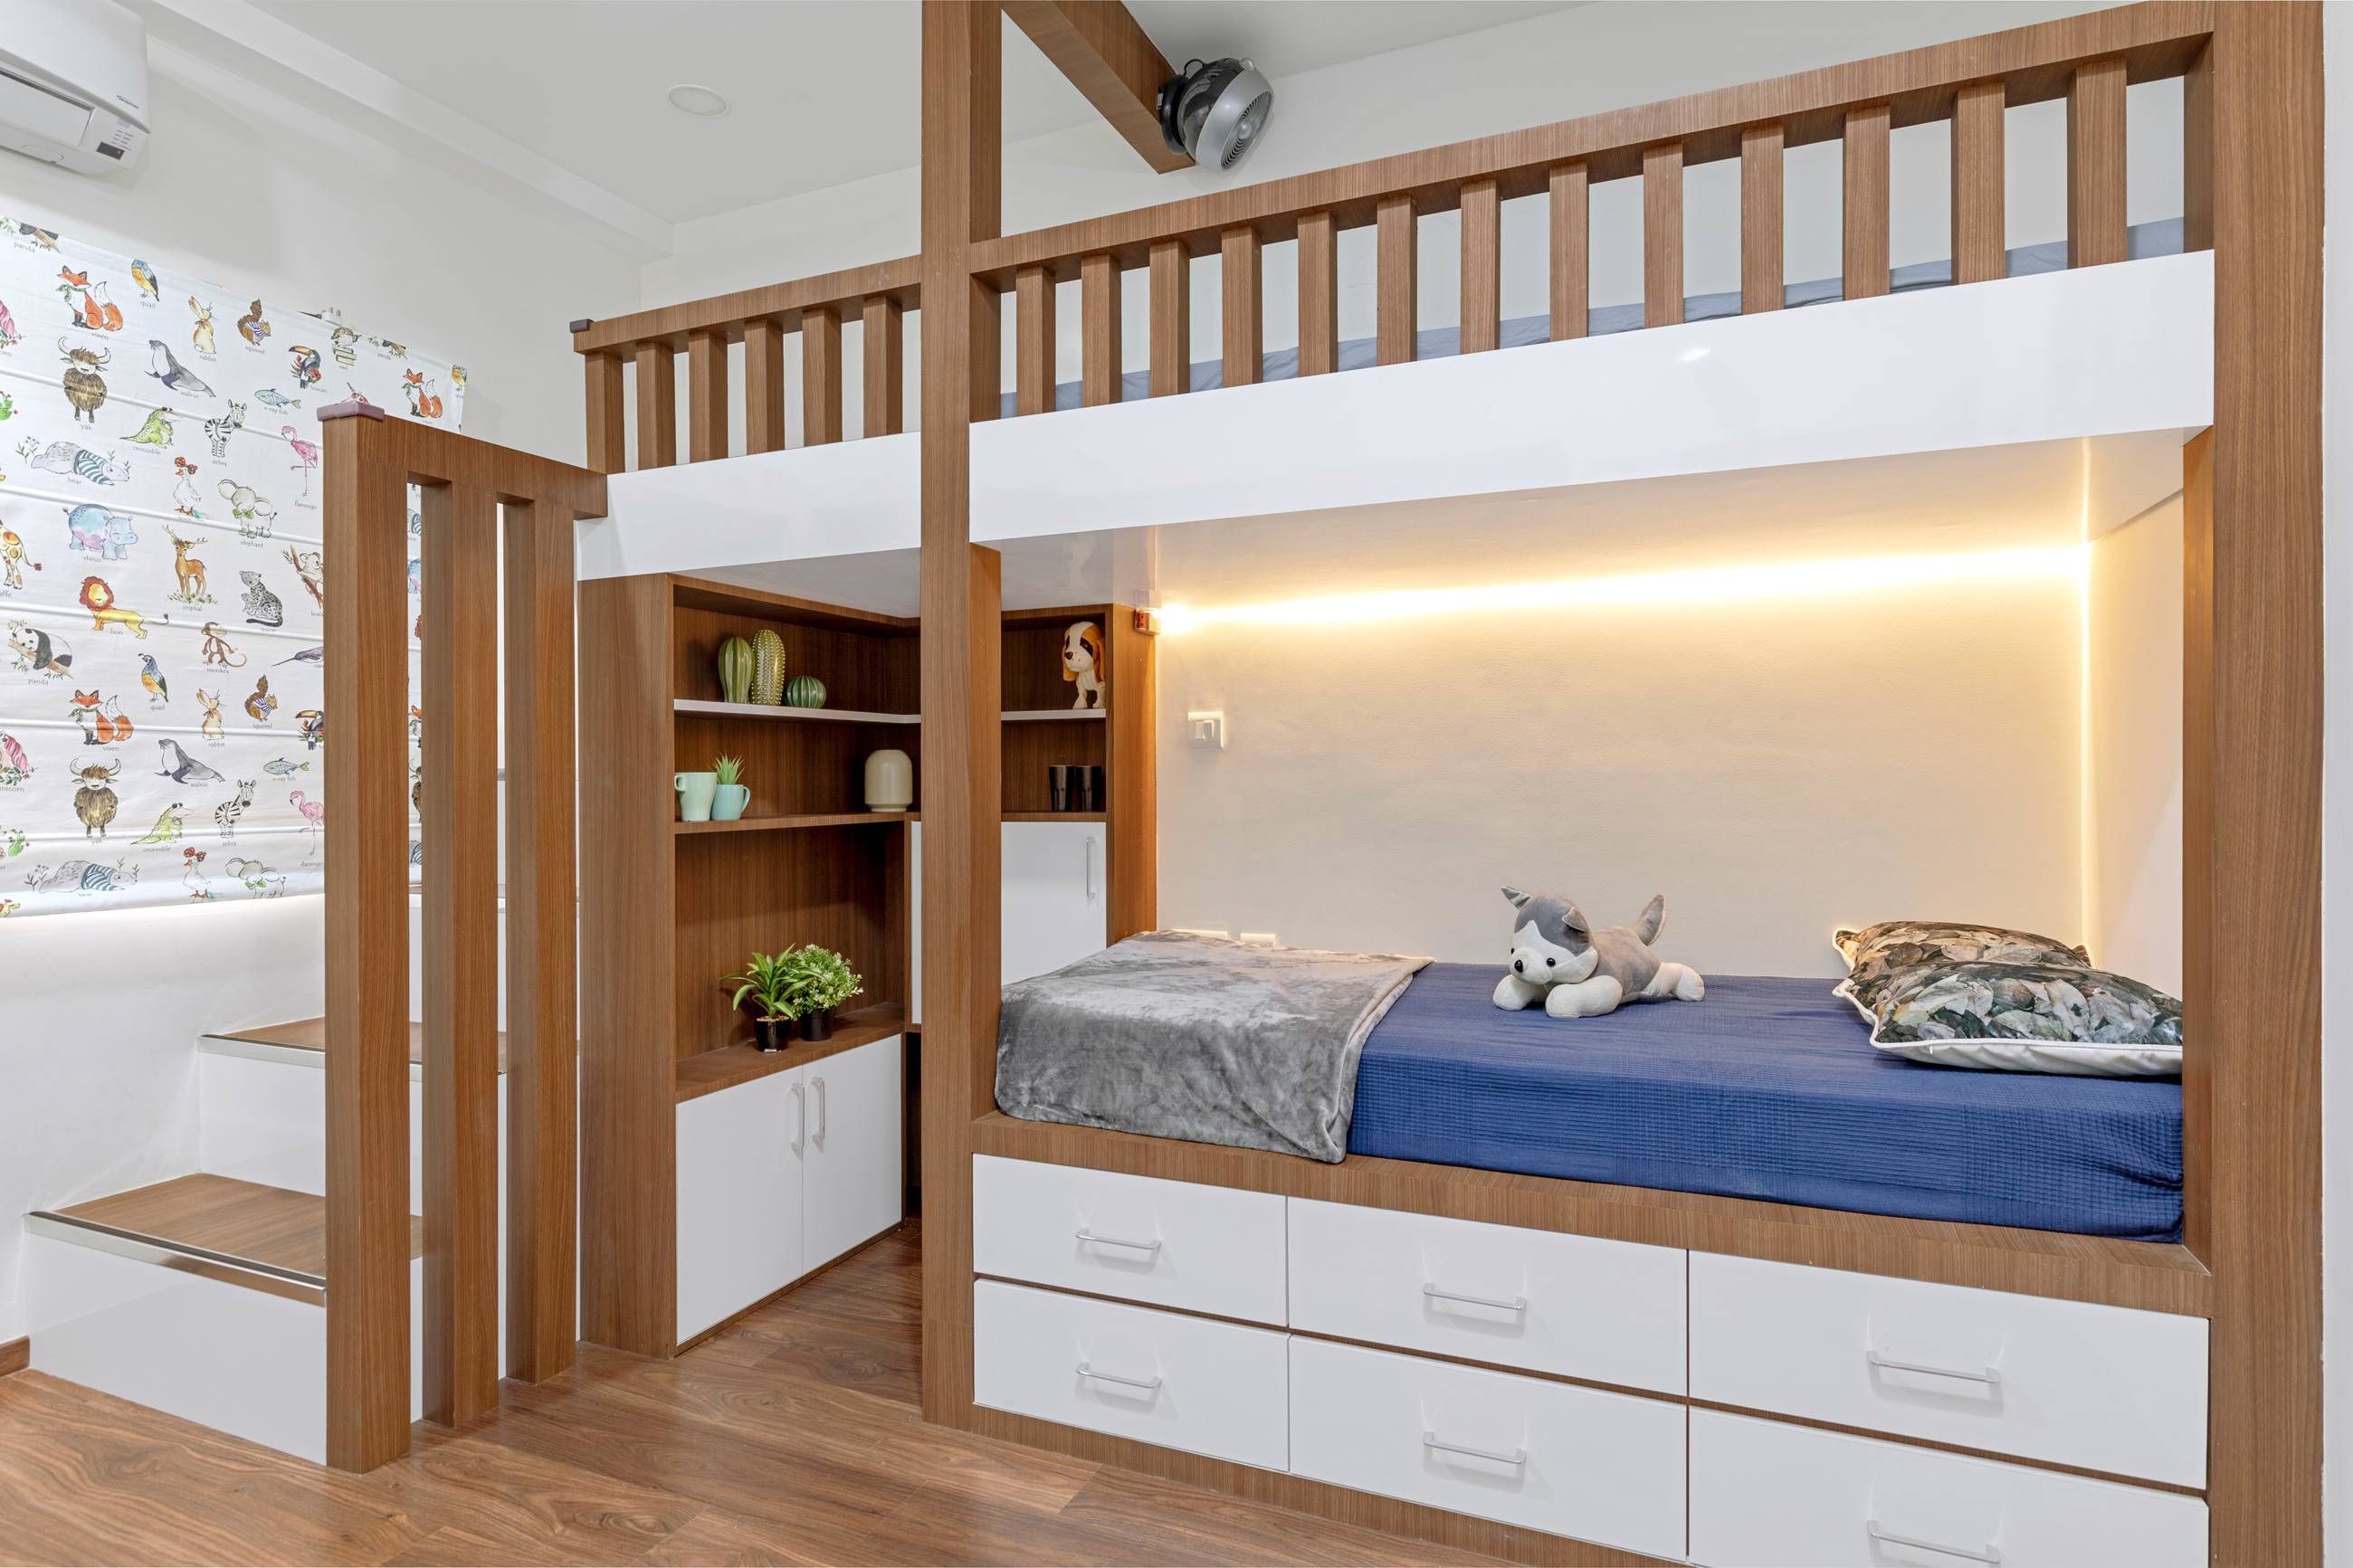 Modern Kids Bedroom Design With A Wooden Bunk Bed And Cove Lights